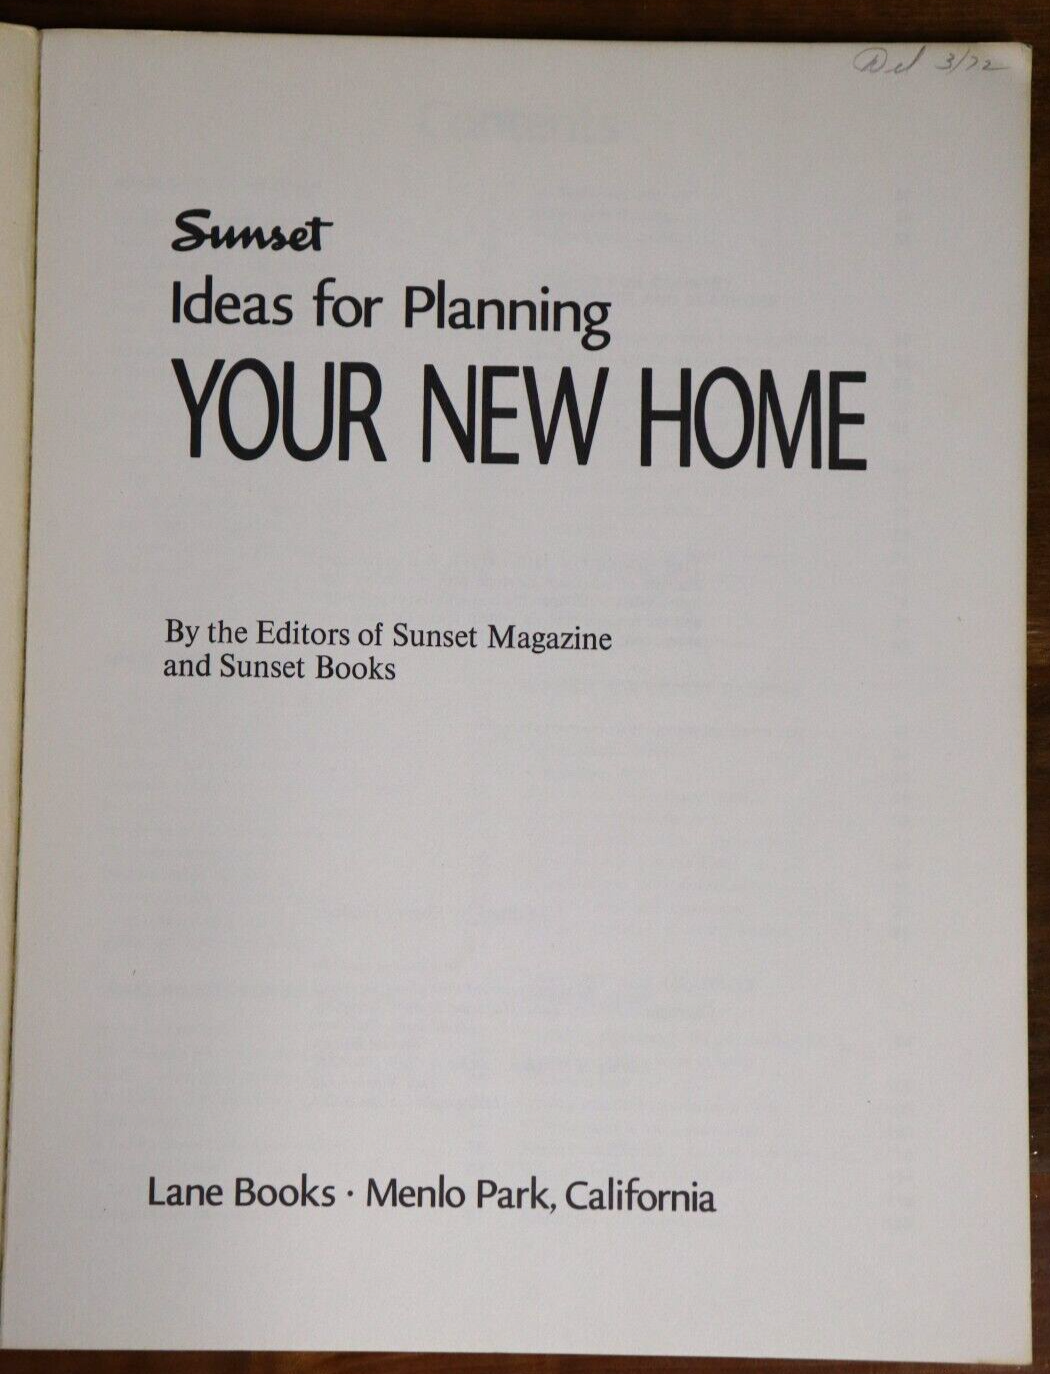 1971 Ideas For Planning Your New Home Vintage Architectural Reference Book - 0